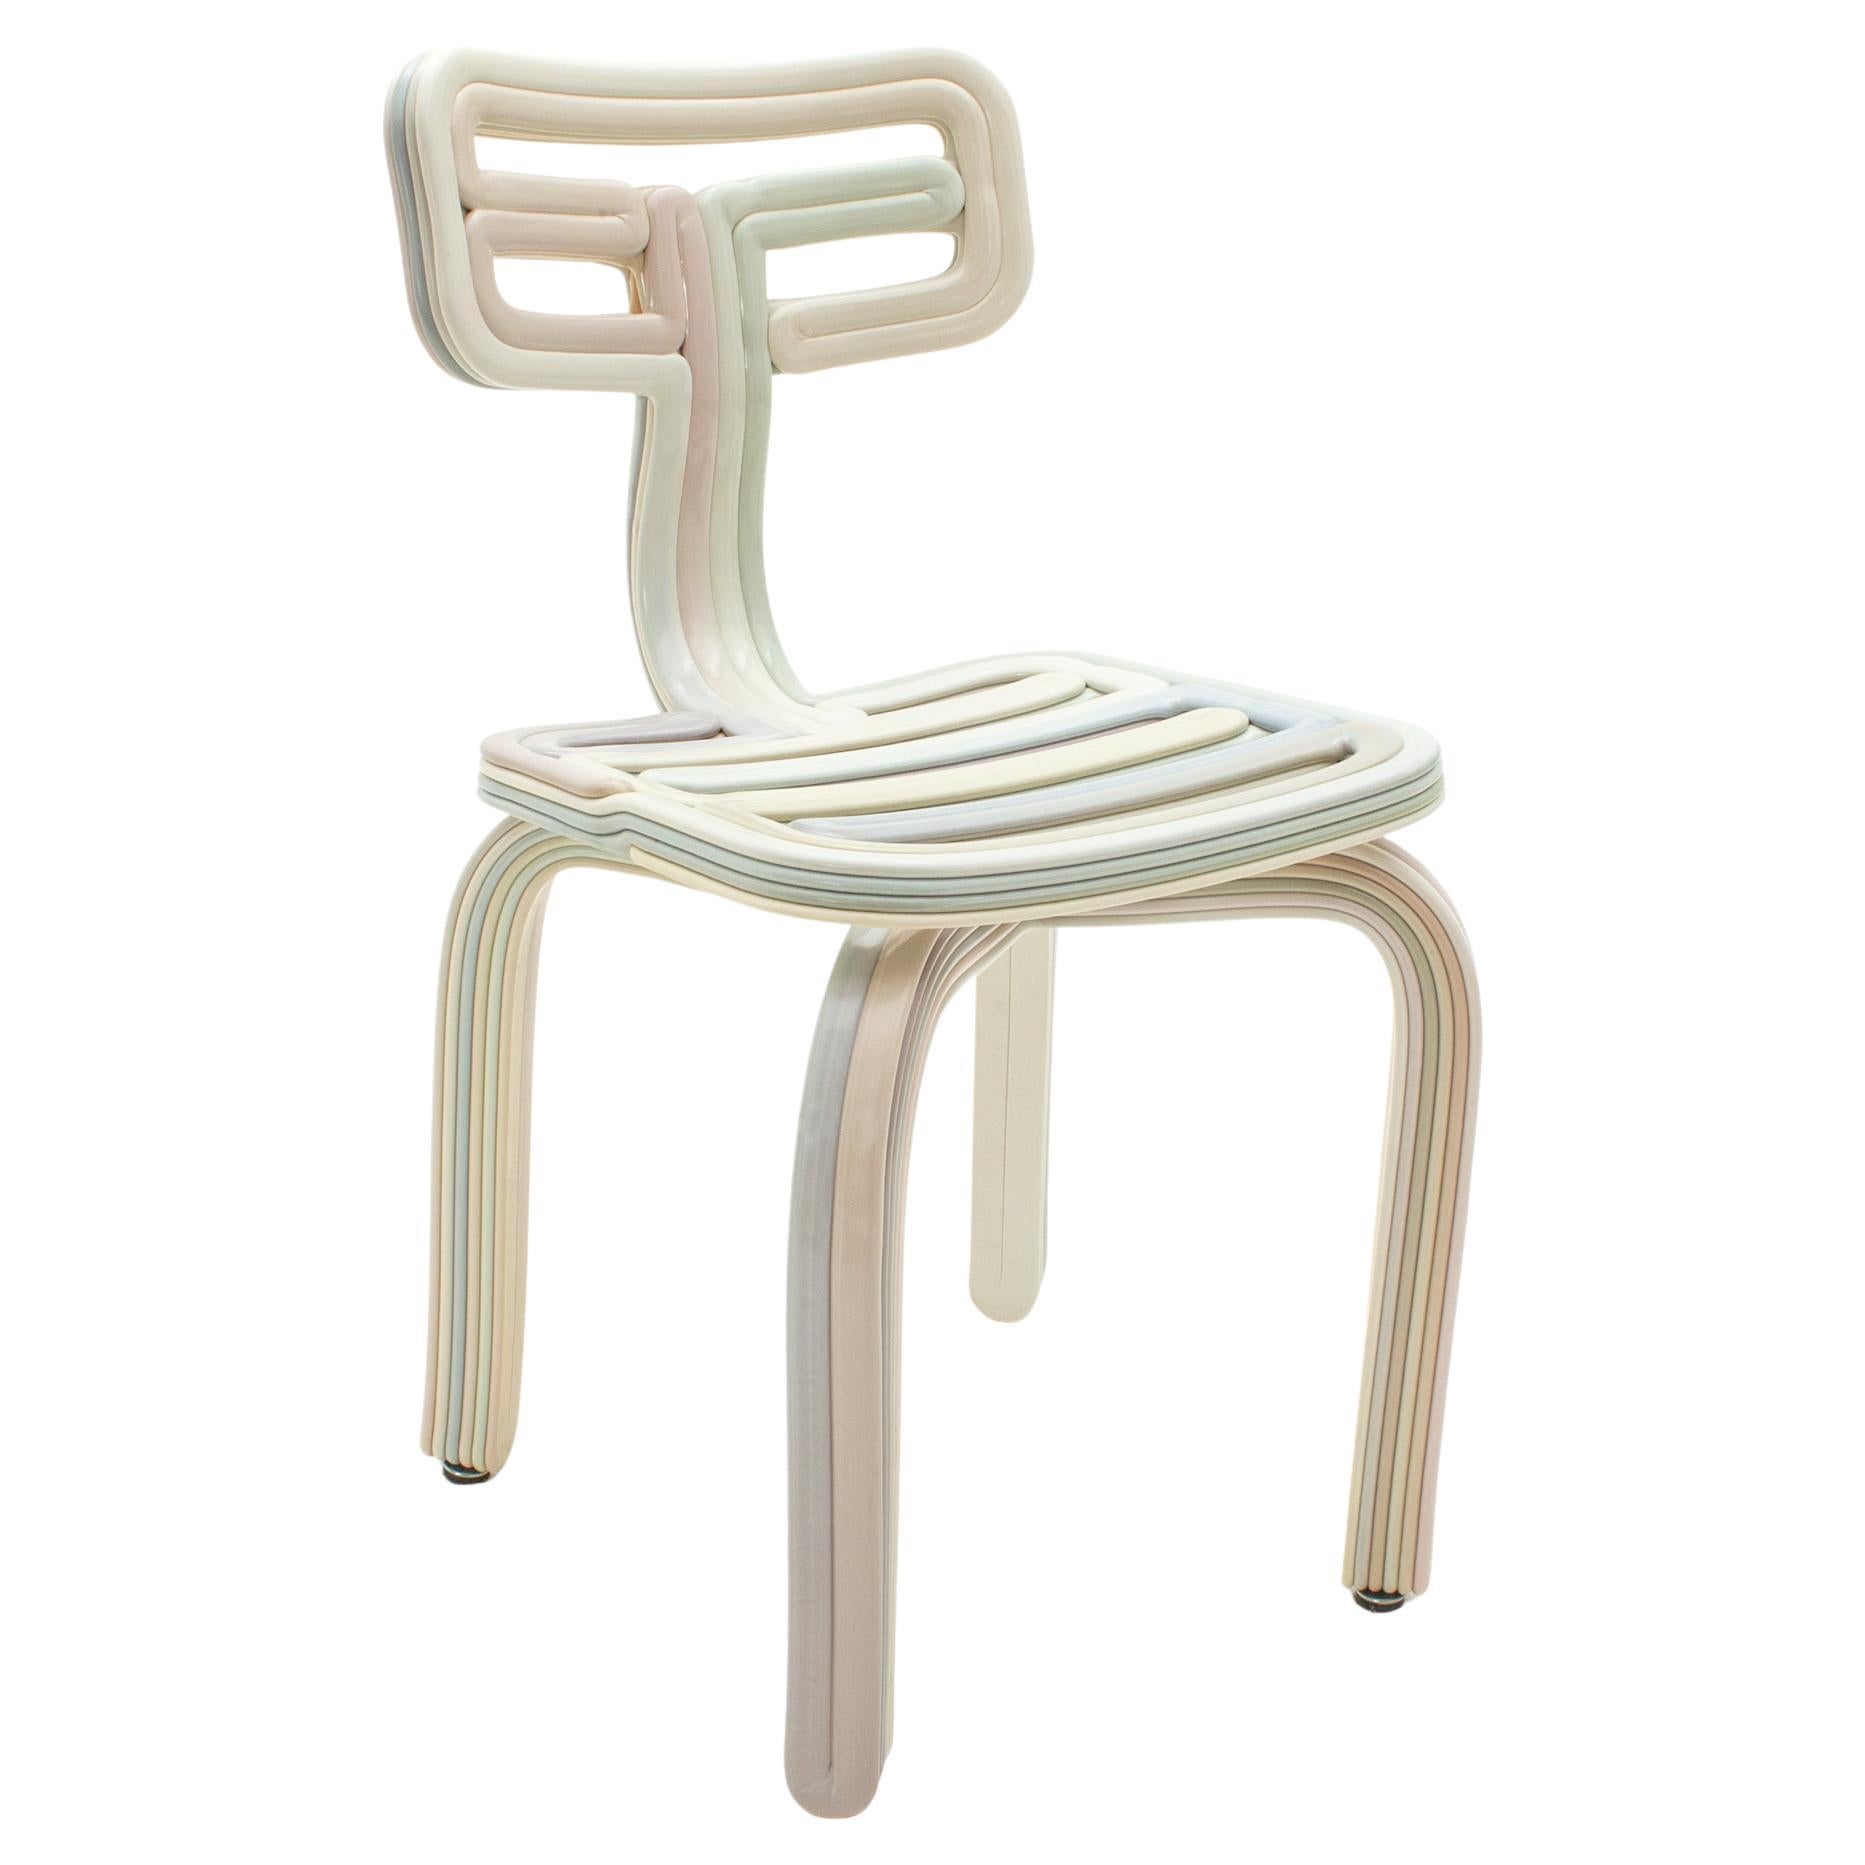 Chubby Chair in Buttermilk 3D Printed Recycled Plastic 